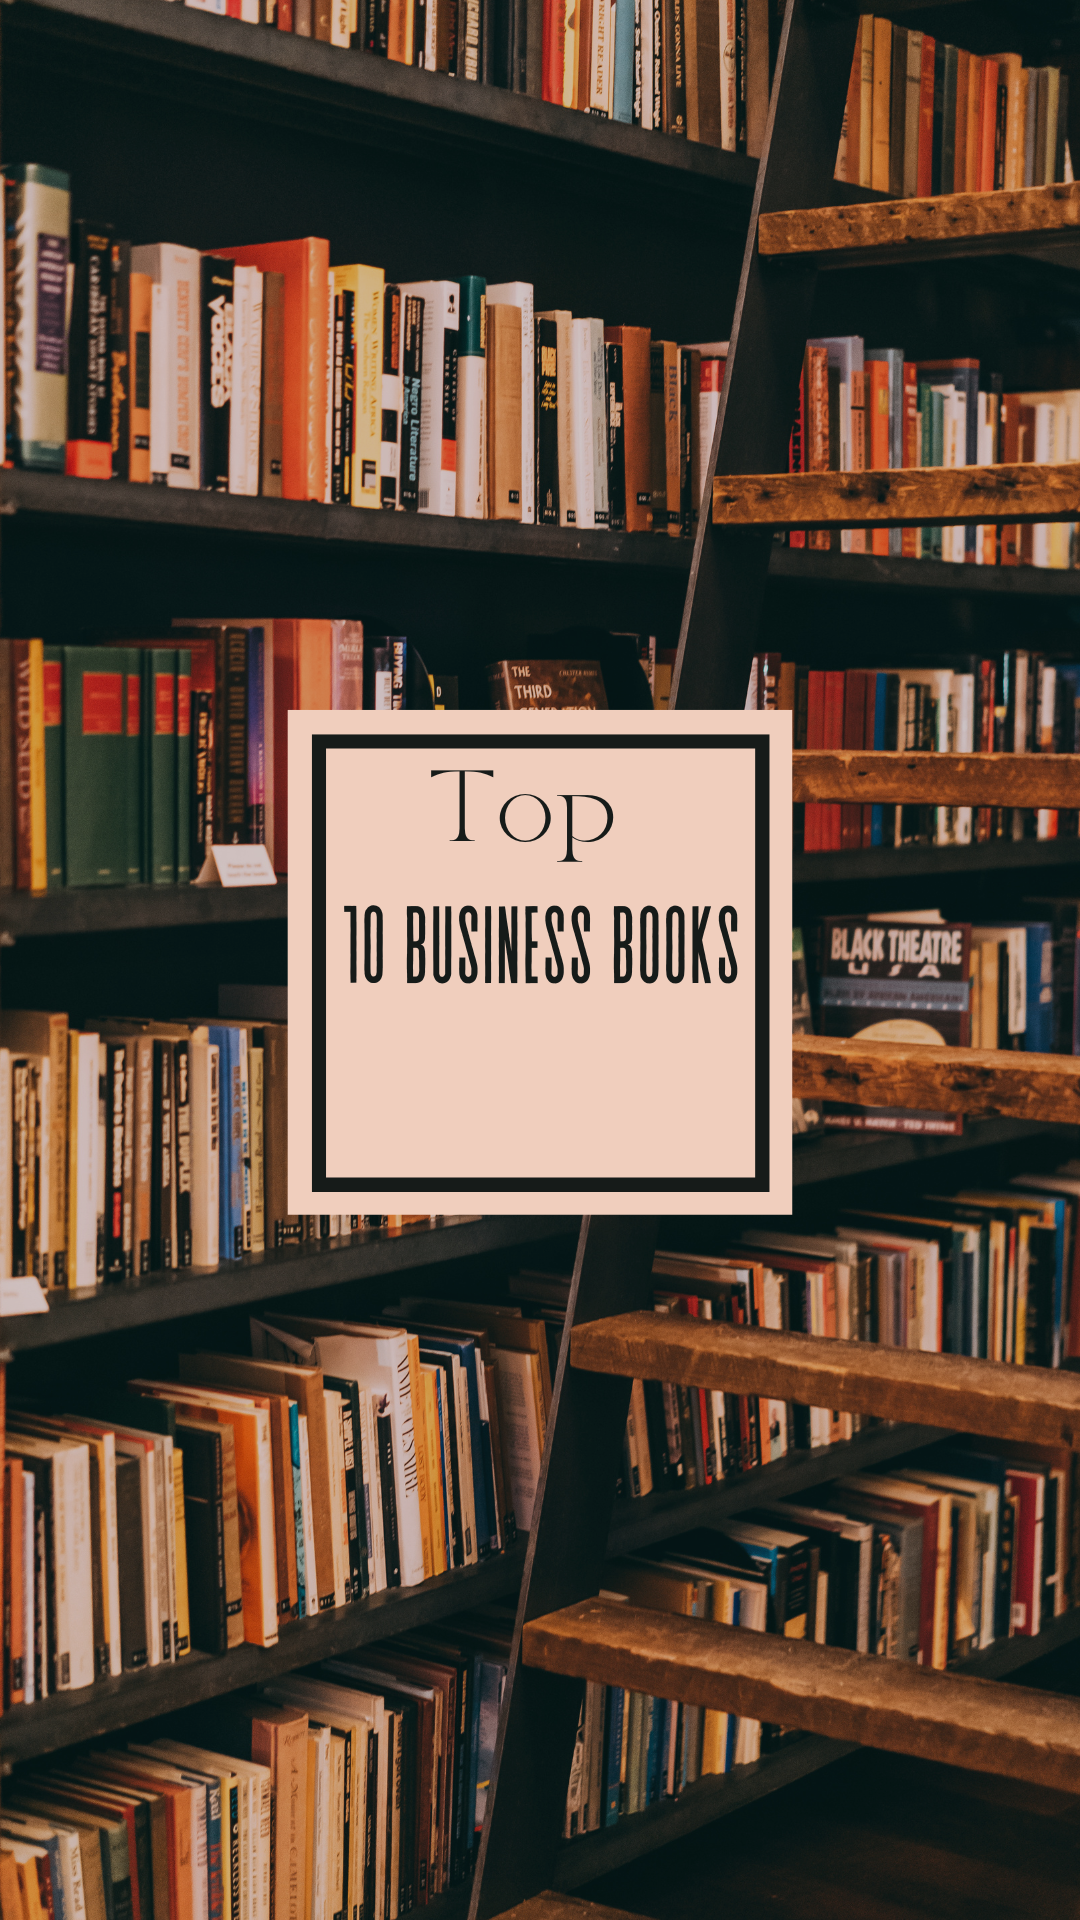 Top 10 Business Books